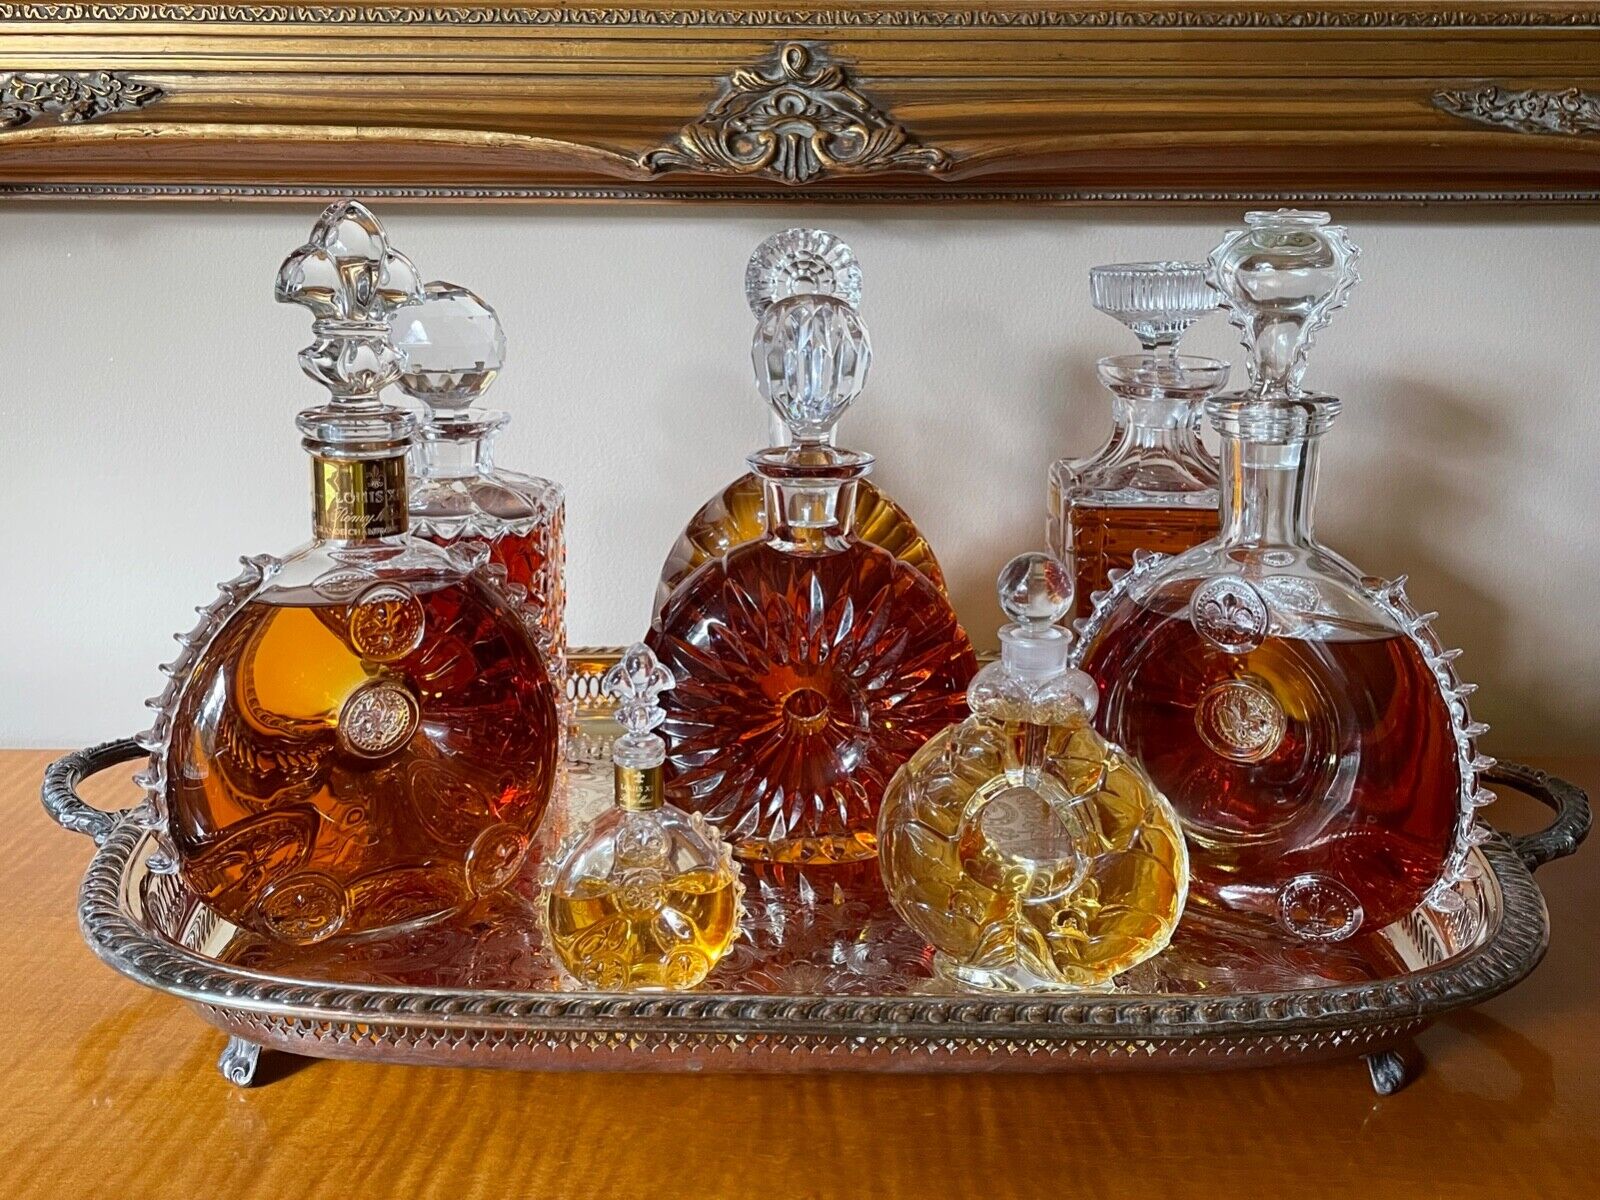 Remy Martin Louis XIII Cognac Baccarat Crystal Decanter France